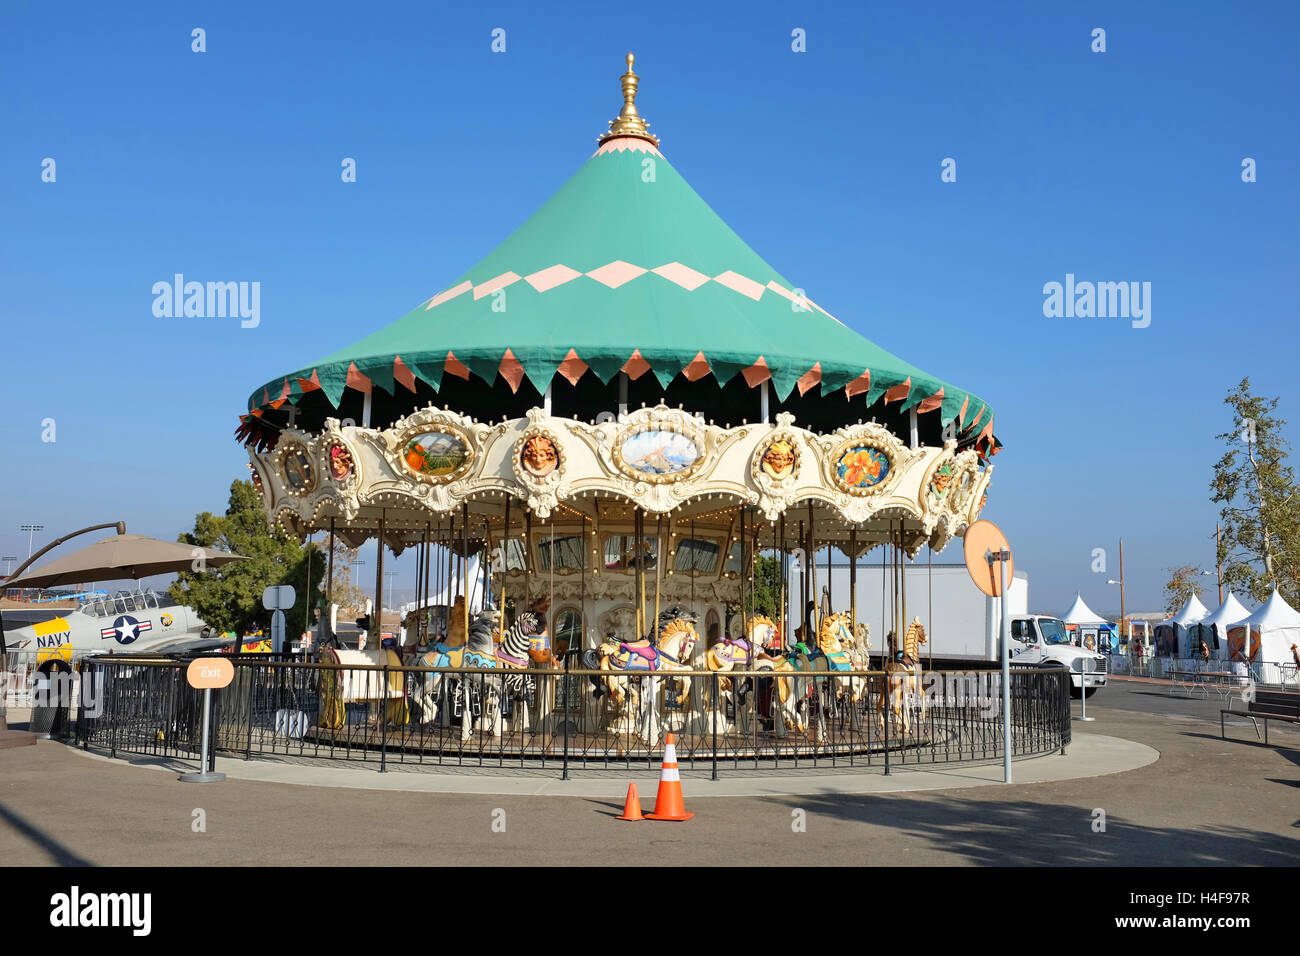 IRVINE, CA - OCTOBER 14, 2016: The Orange County Great Park Carousel Ride. The carousel ride is one of two current attractions a Stock Photo